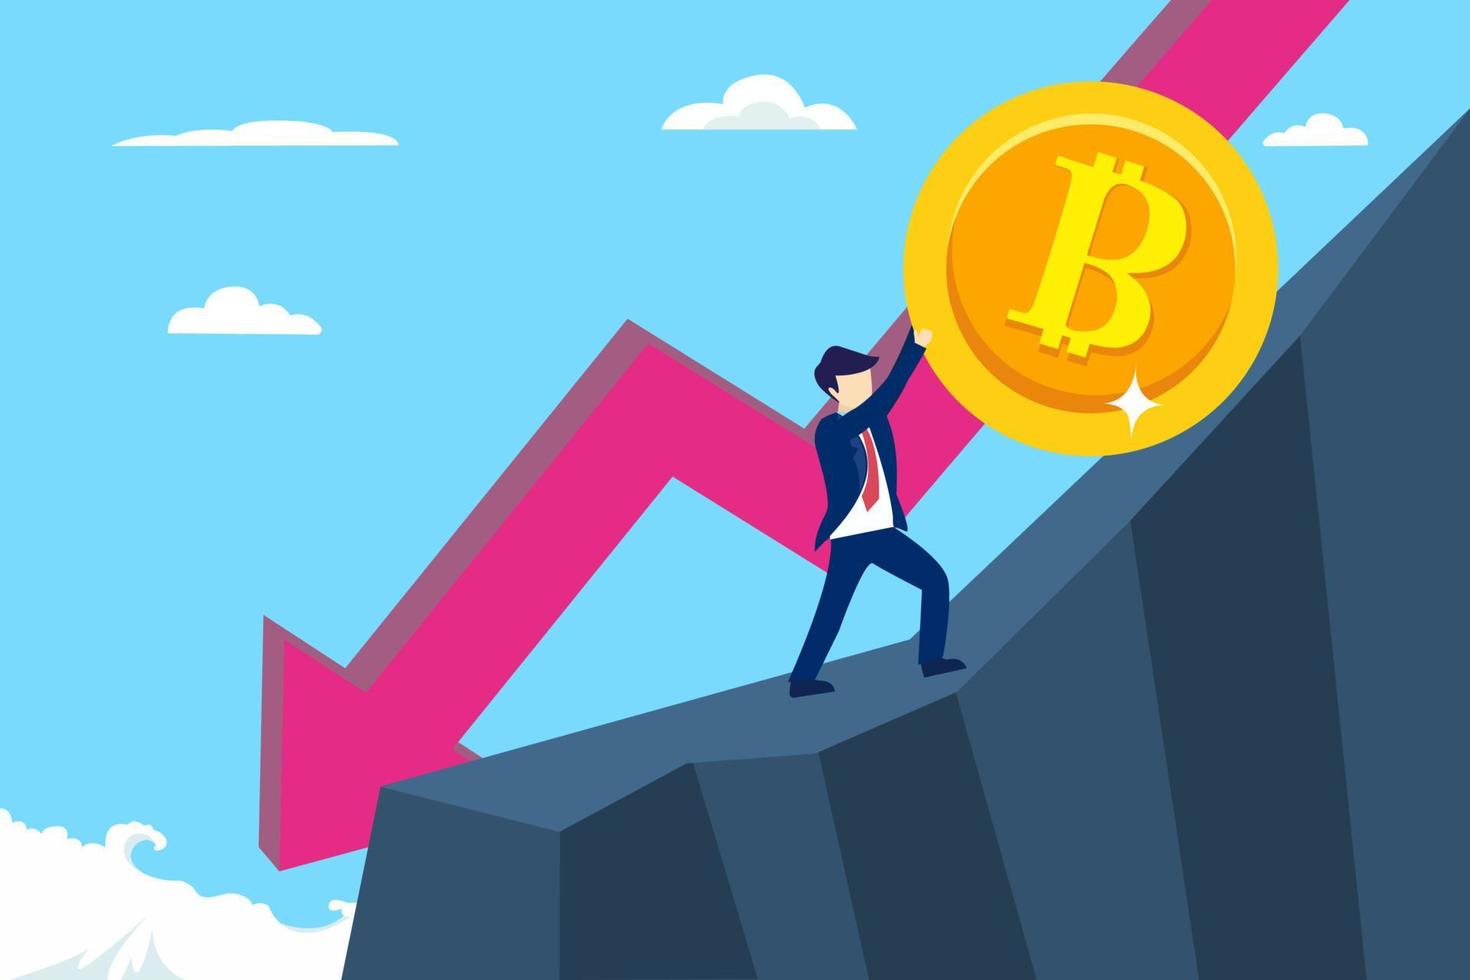 The Fallen In Price Bitcoin Flying Down On Red Arrow. Bankrupt Bitcoin. illustration flat vector template